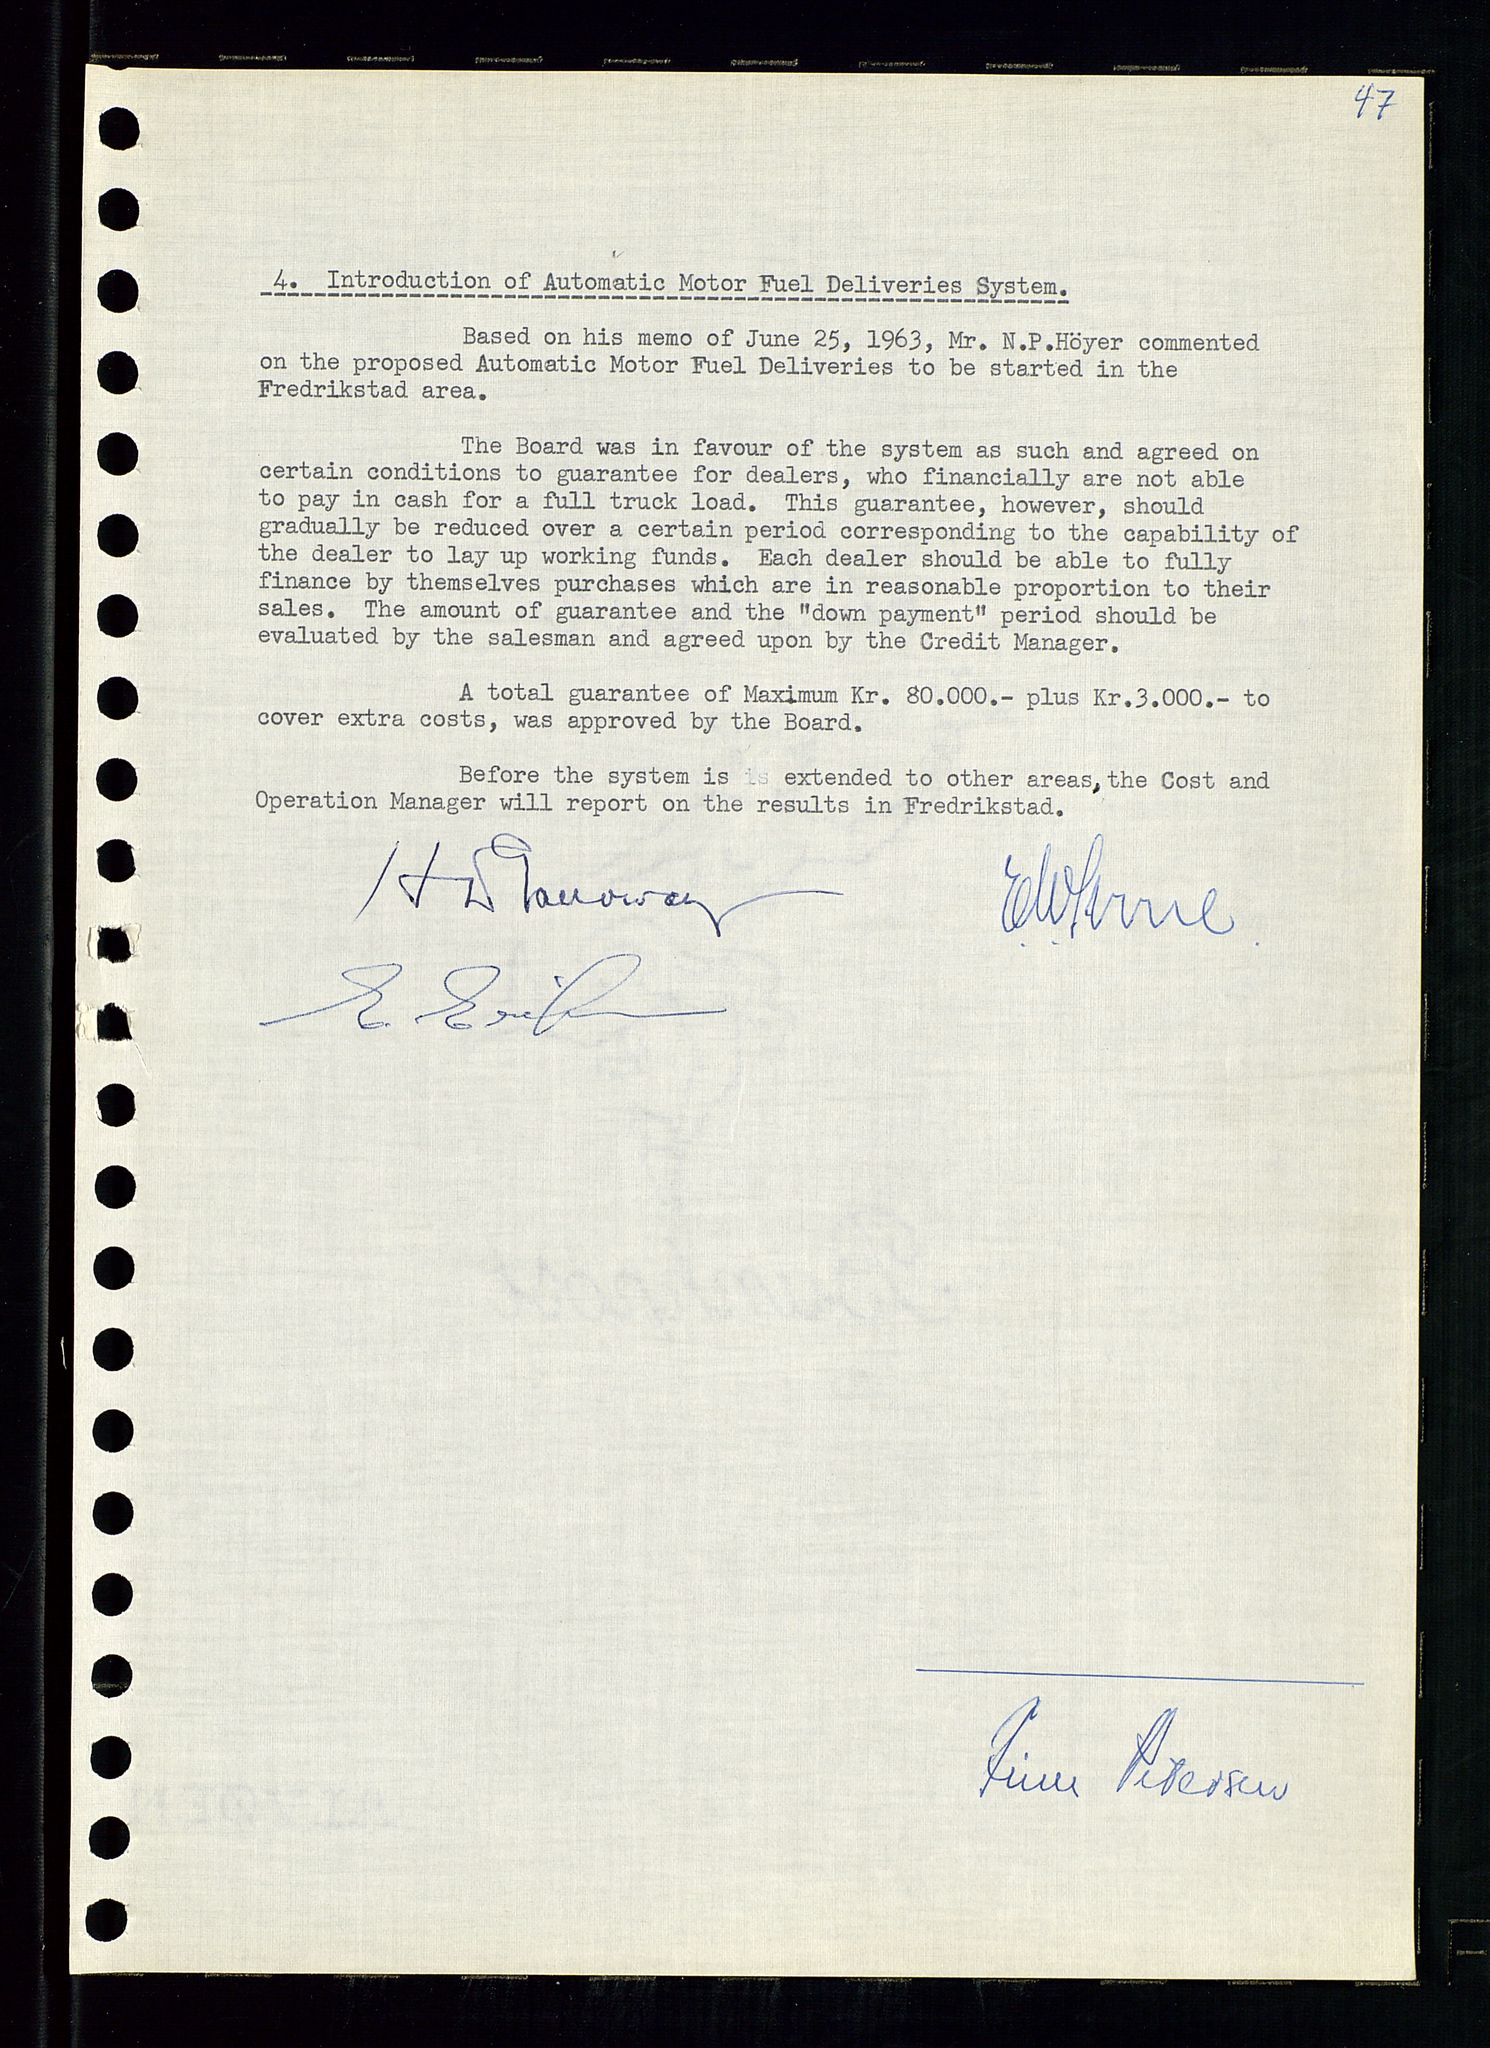 Pa 0982 - Esso Norge A/S, SAST/A-100448/A/Aa/L0001/0004: Den administrerende direksjon Board minutes (styrereferater) / Den administrerende direksjon Board minutes (styrereferater), 1963-1964, s. 216